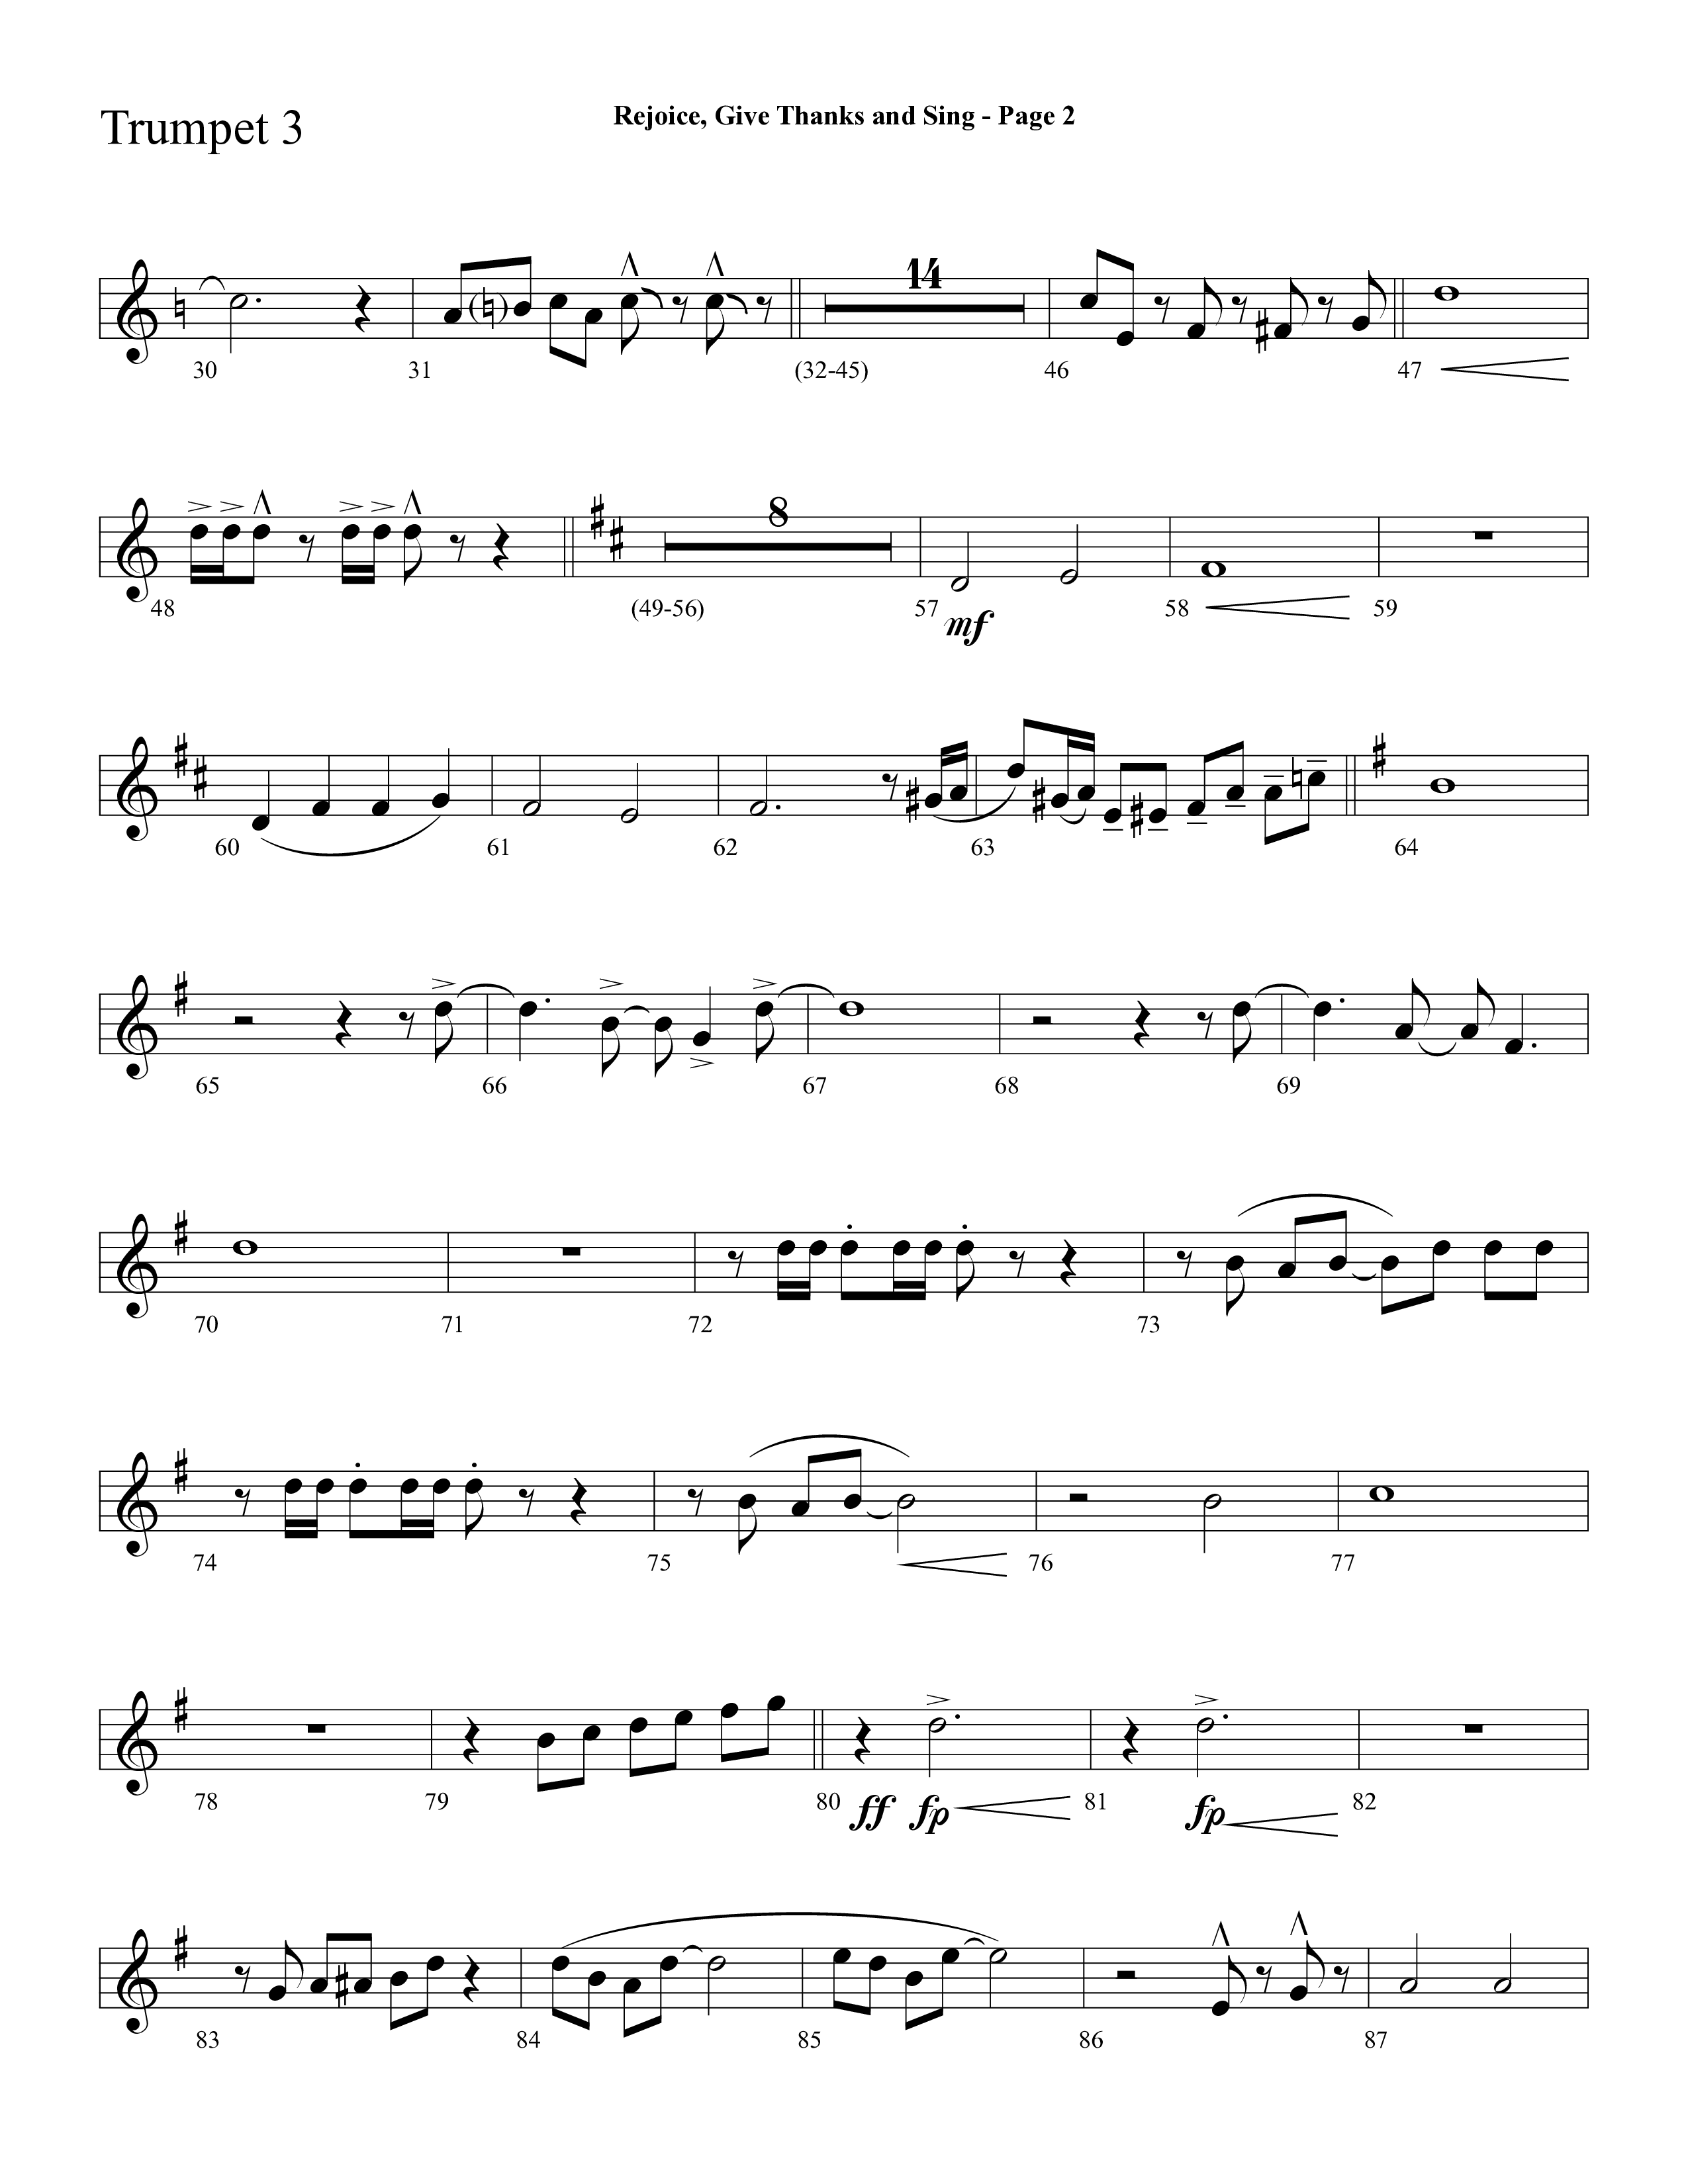 Rejoice, Give Thanks And Sing (with Rejoice, The Lord Is King, Come, Thou Almighty King) (Choral Anthem SATB) Trumpet 3 (Lifeway Choral / Arr. Dave Williamson)